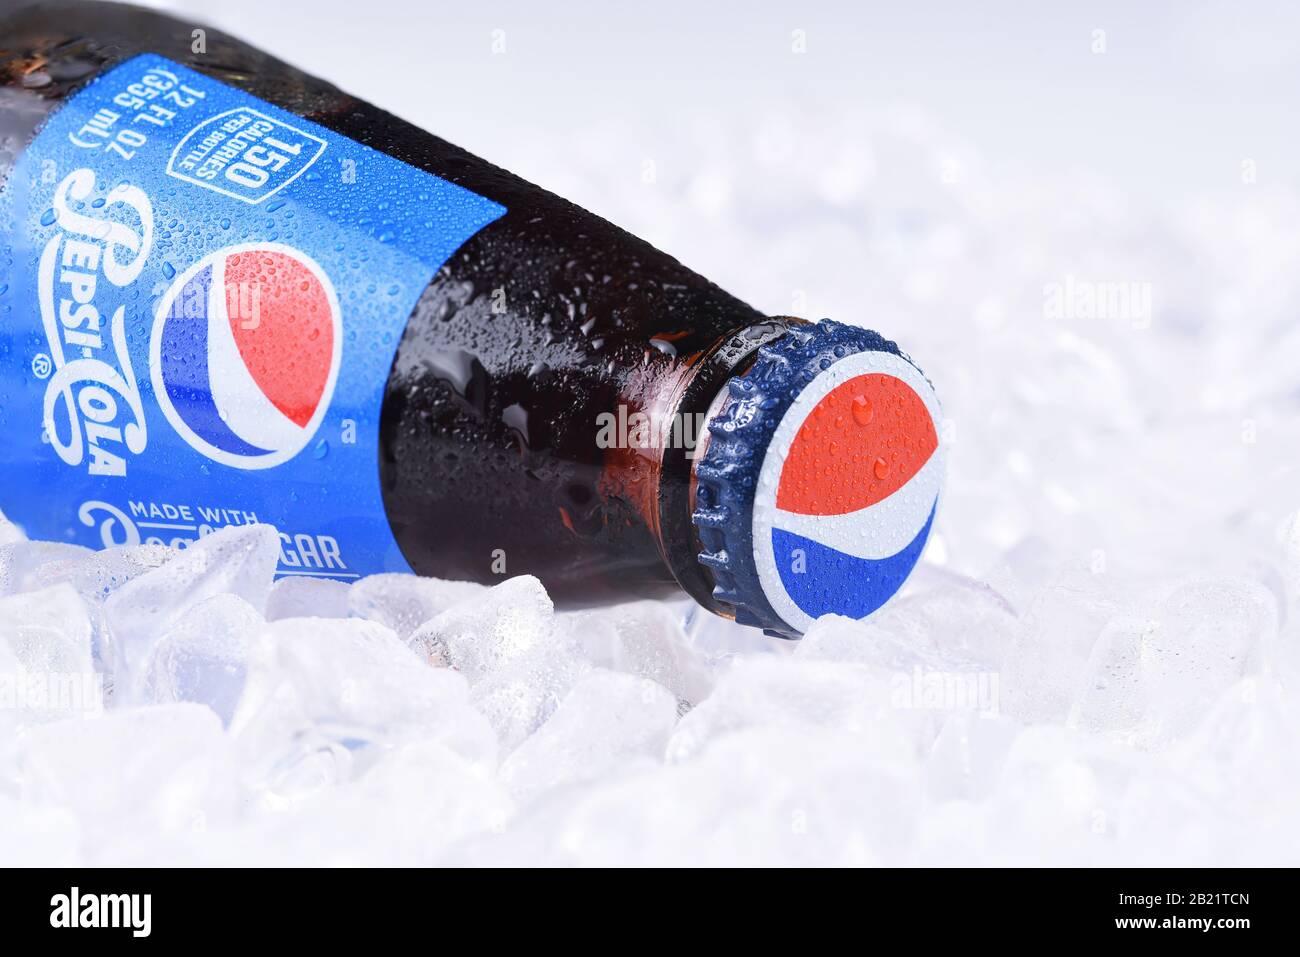 IRVINE, CALIFORNIA - FEBRUARY 7, 2017: Pepsi-Cola Bottle on ice. Pepsi is one of the leading producers of soda and soft drinks in the USA. Stock Photo